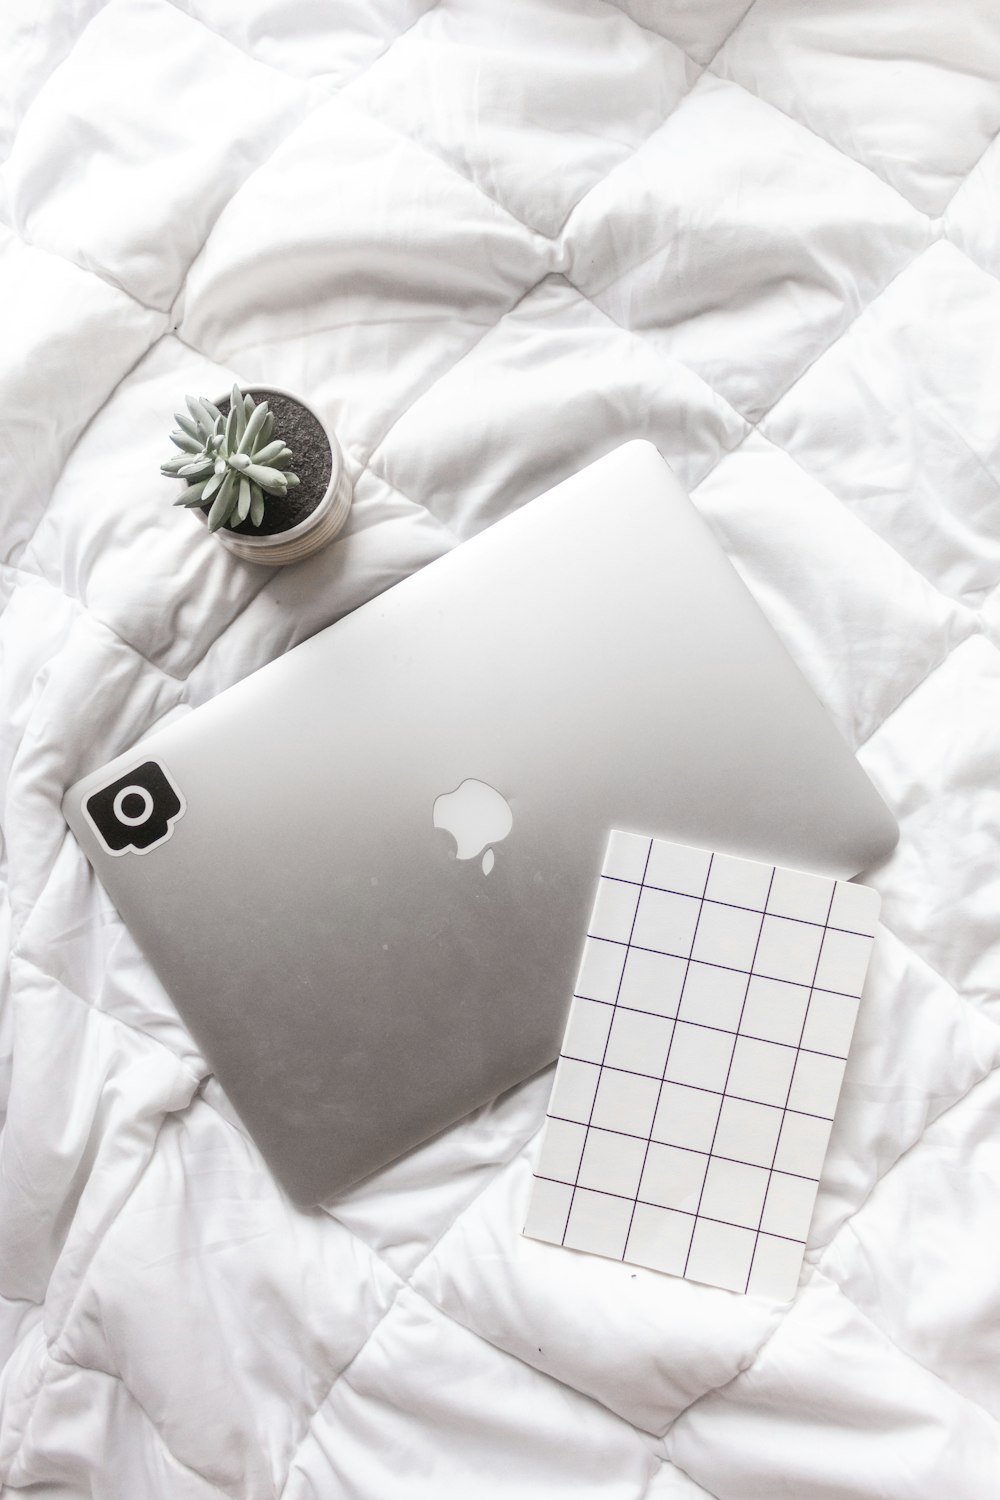 silver macbook on white and gray floral textile